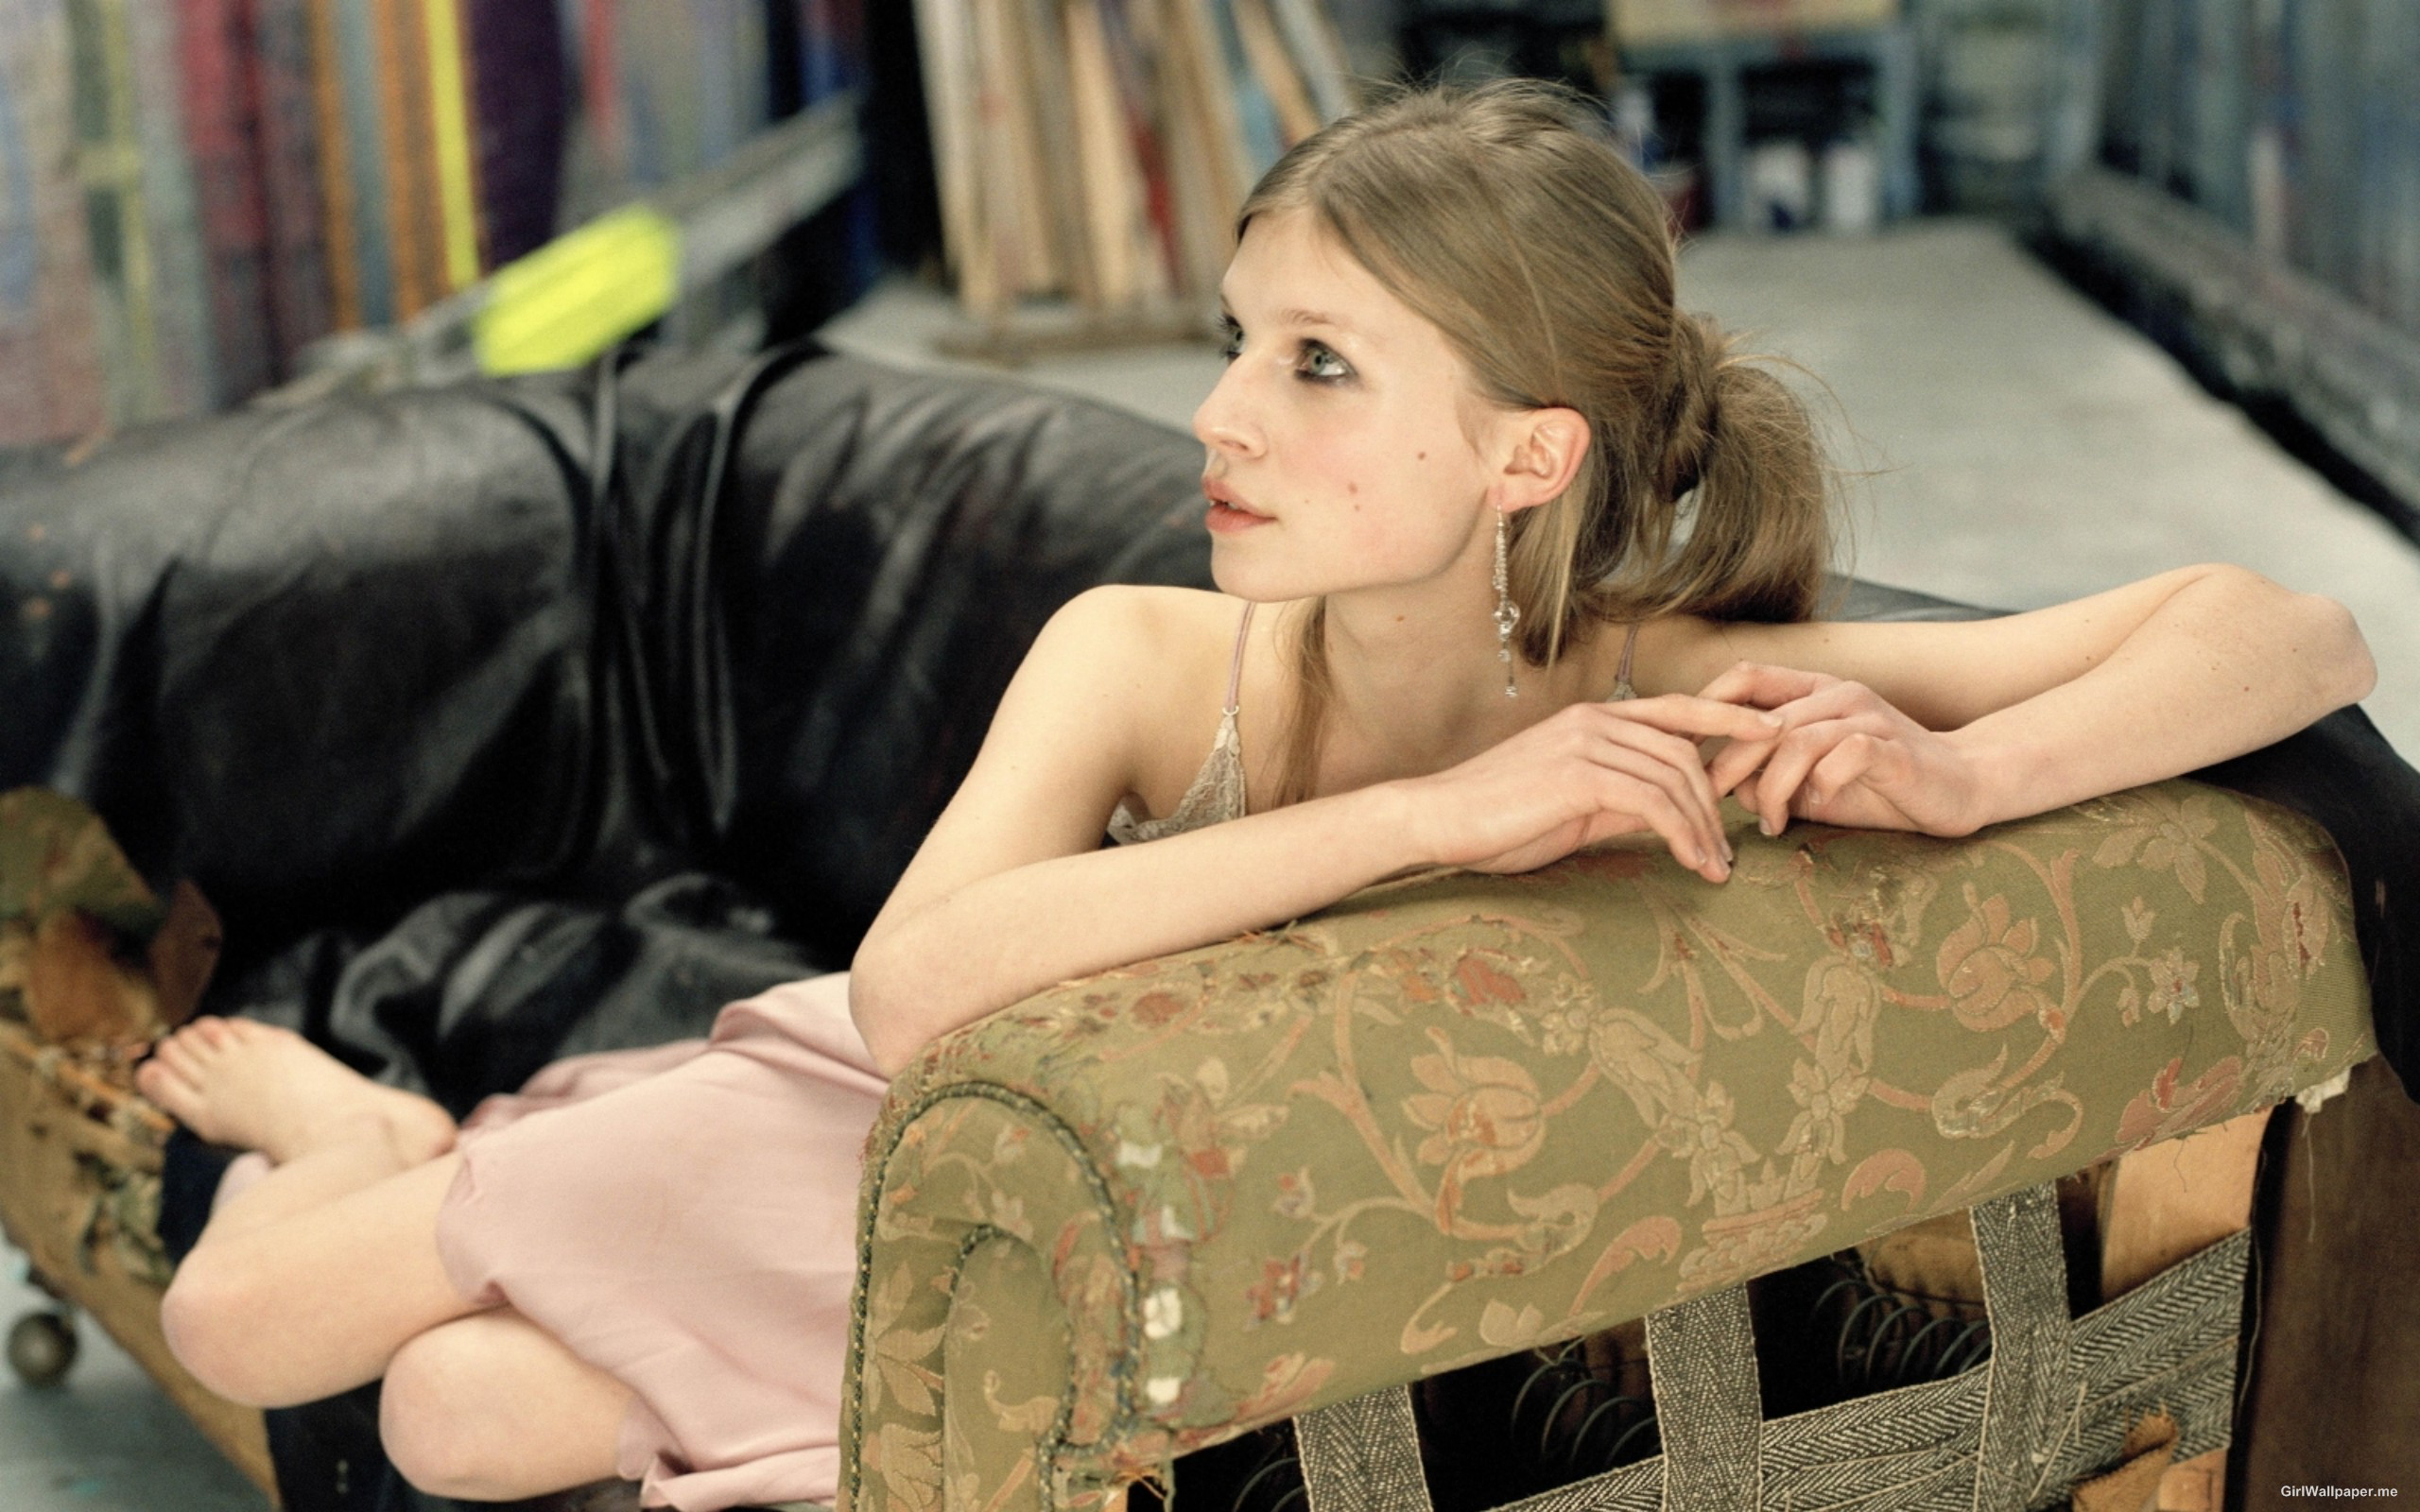 celebrity, clemence poesy, actress, french